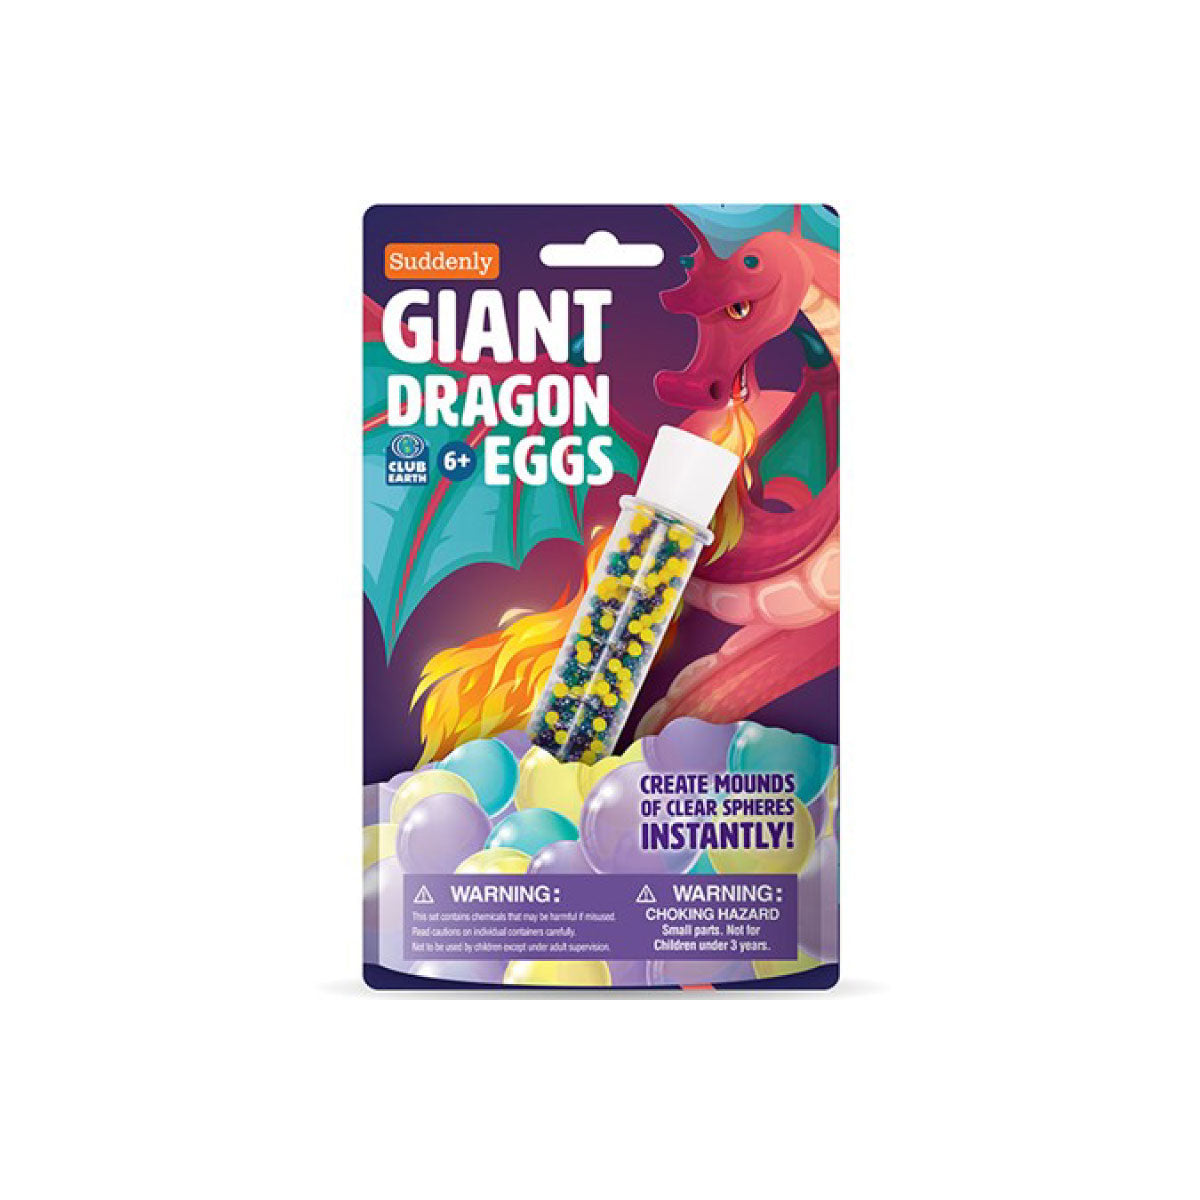 Suddenly Giant Dragon Eggs - Just Add Water! From Play Vision